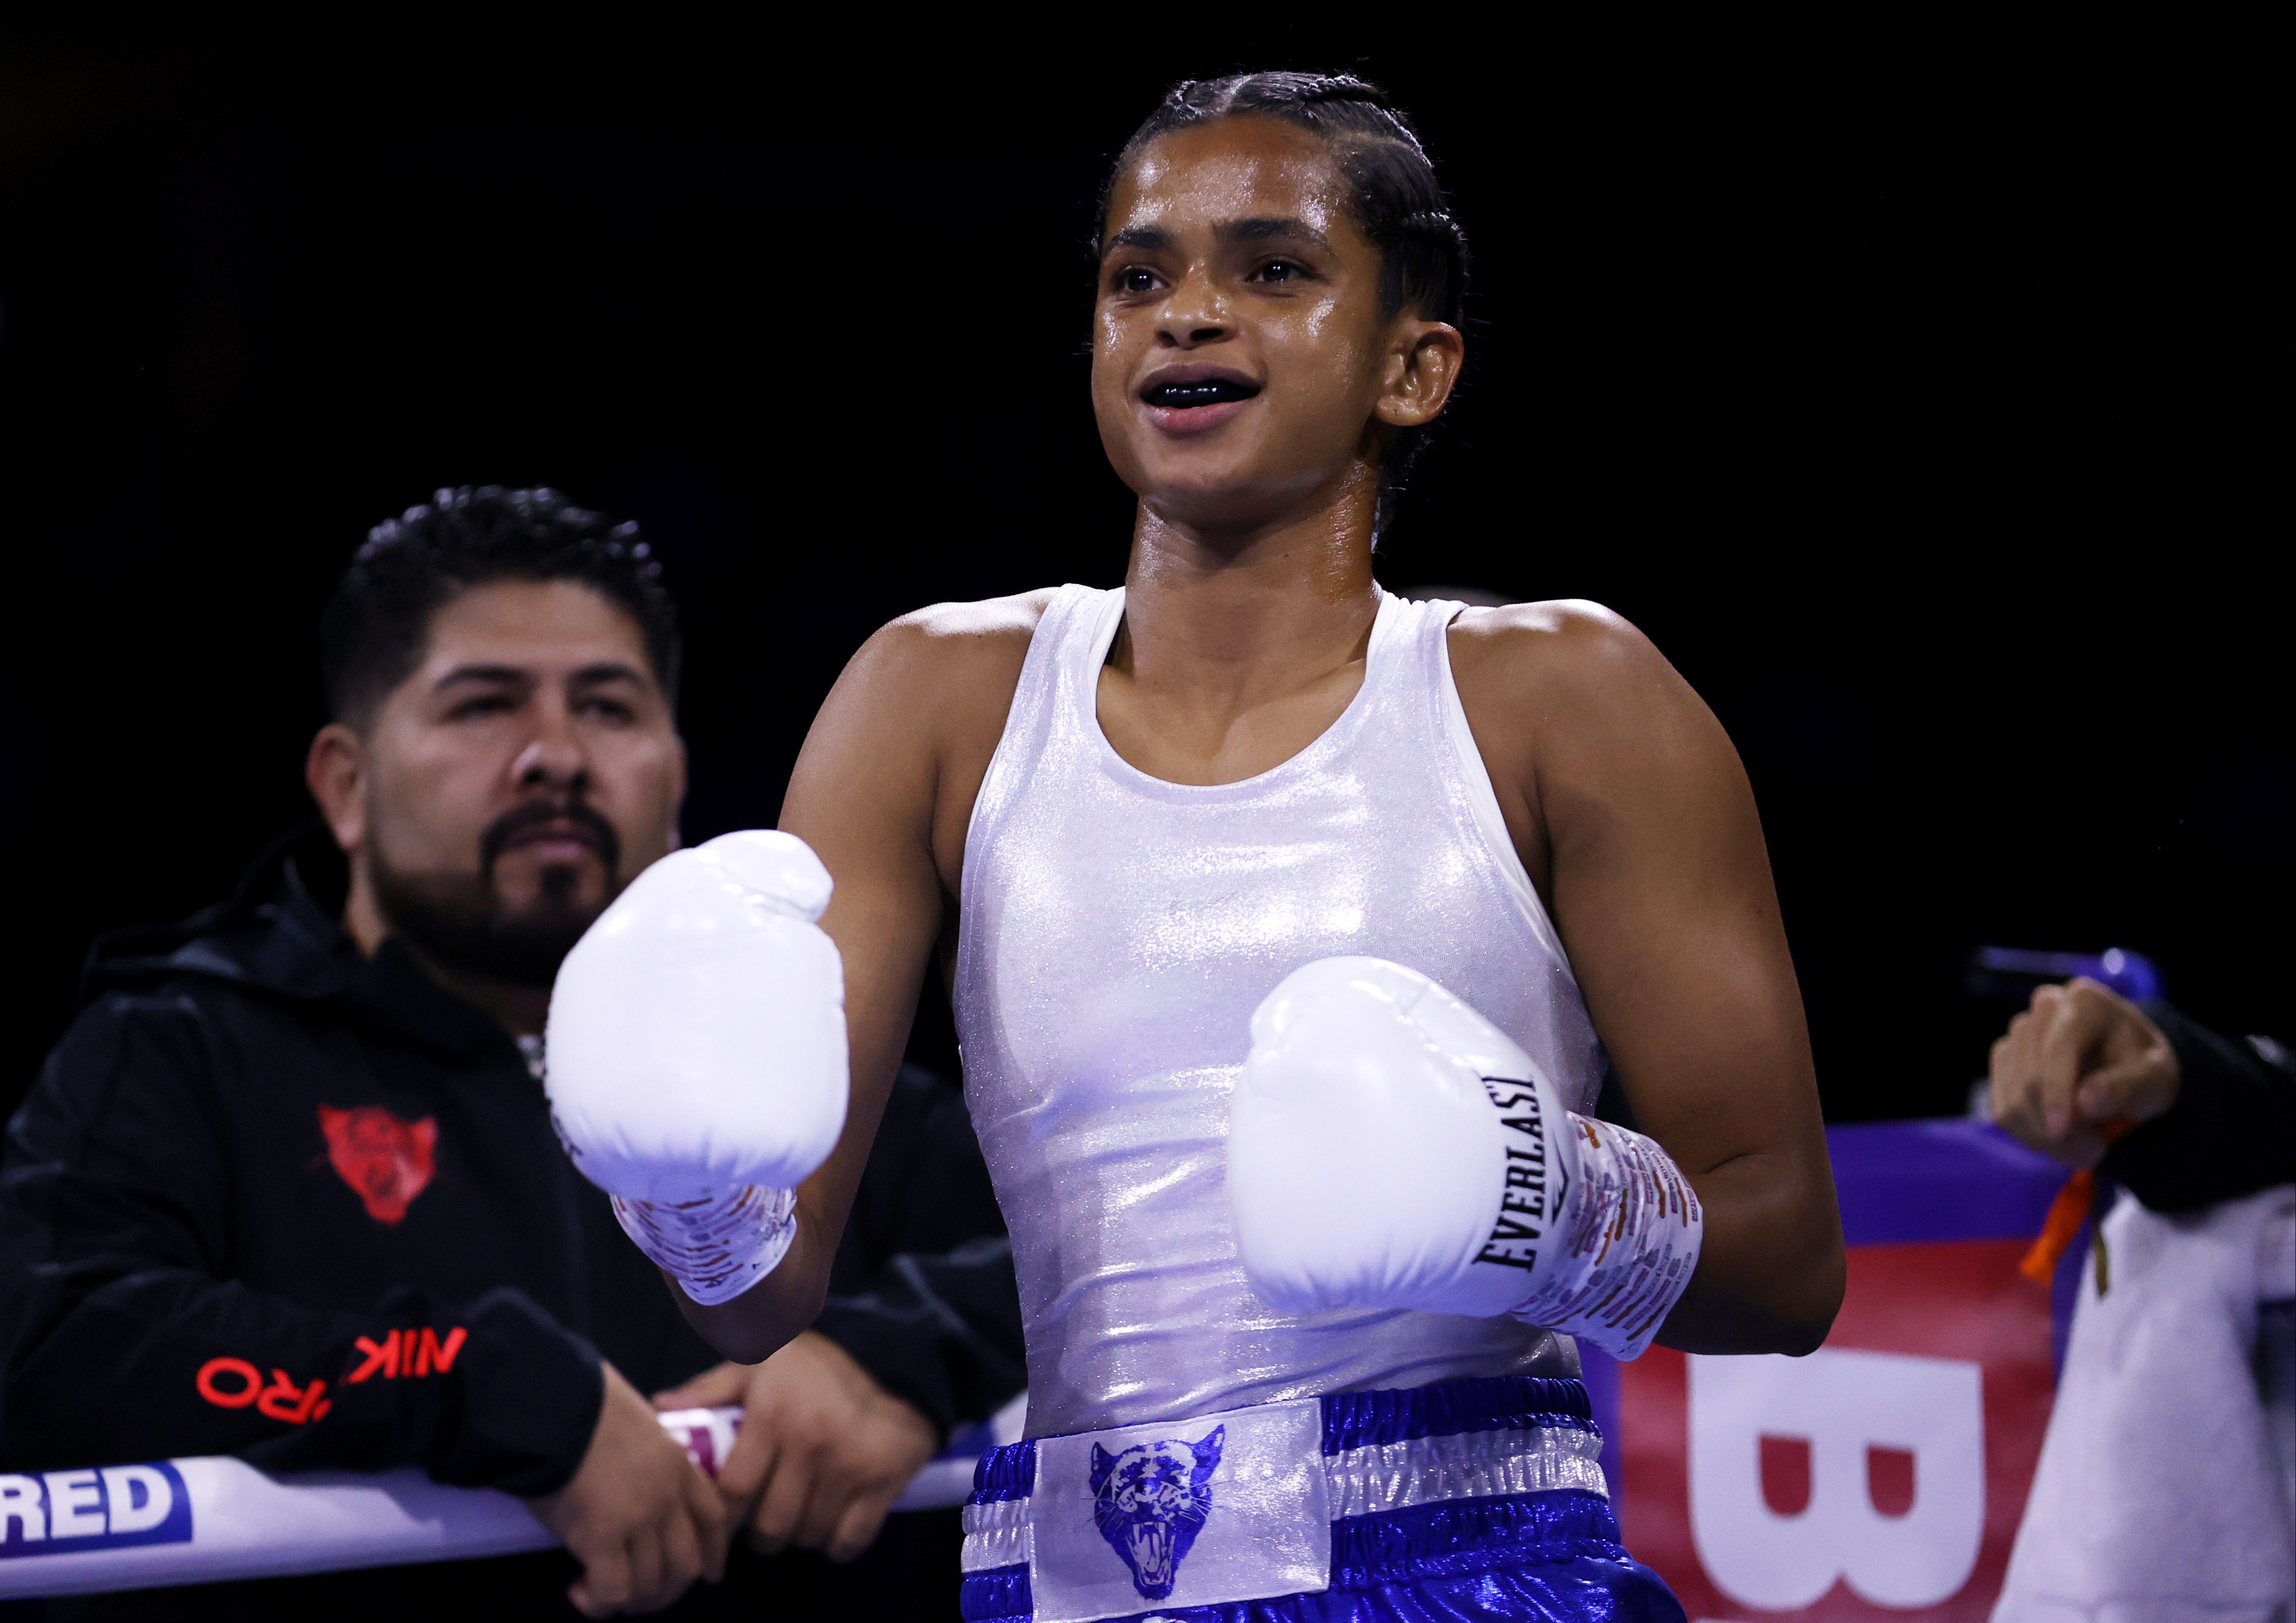 , Meet Ramla Ali, the first woman ever to box in Saudi Arabia on Anthony Joshua undercard who is refugee and model